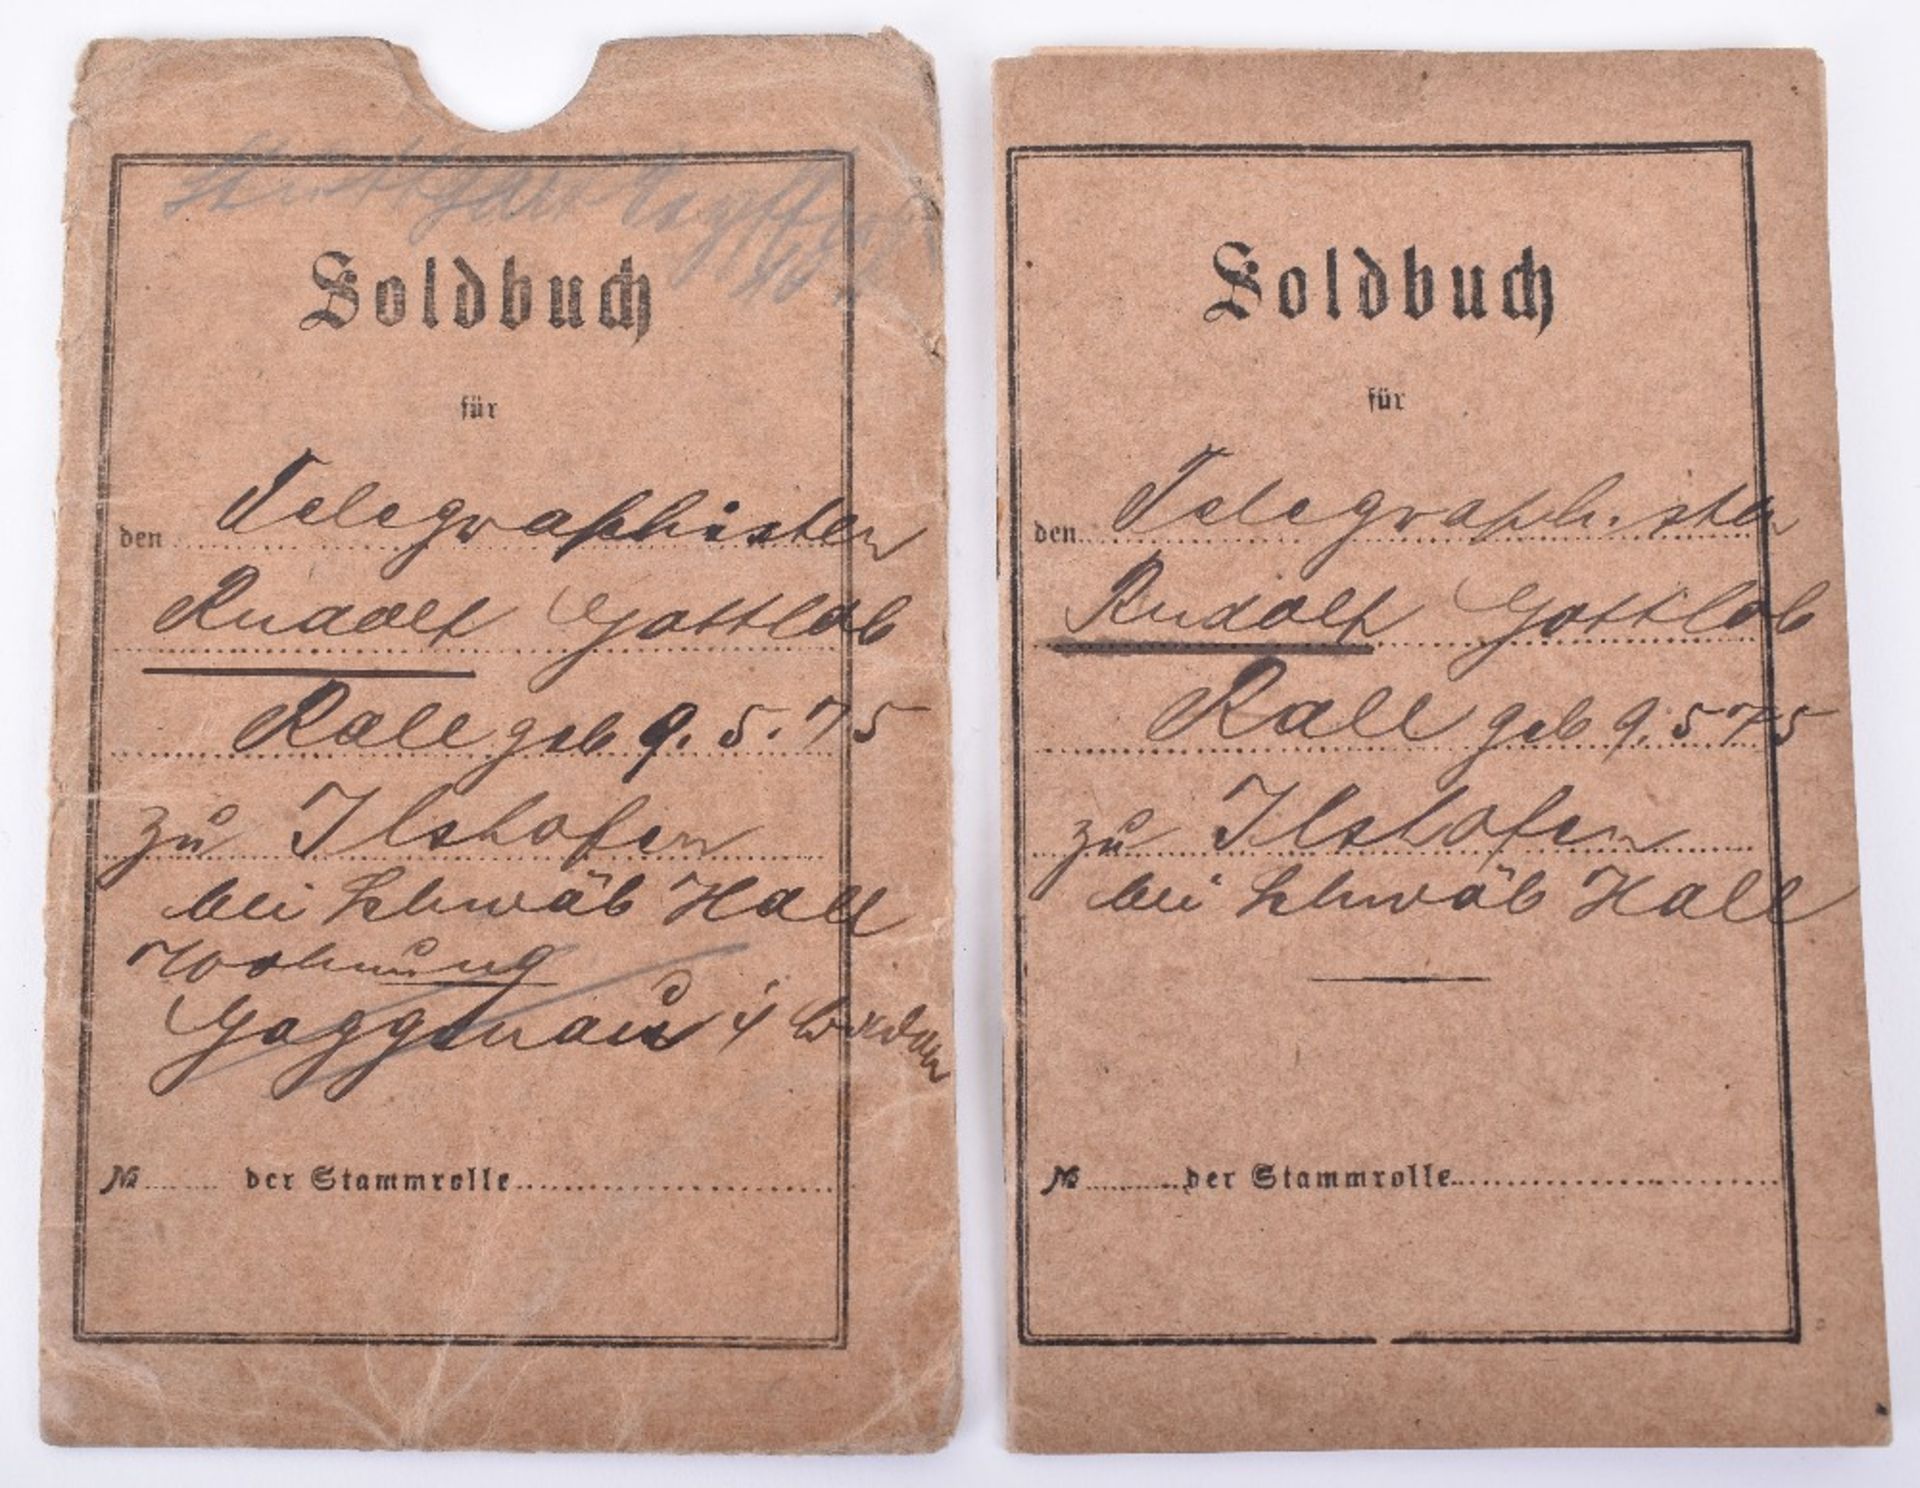 WW1 Soldbuch and Militarpass of Gunther Rall’s Father Rudolf Gottlob Rall - Image 2 of 7